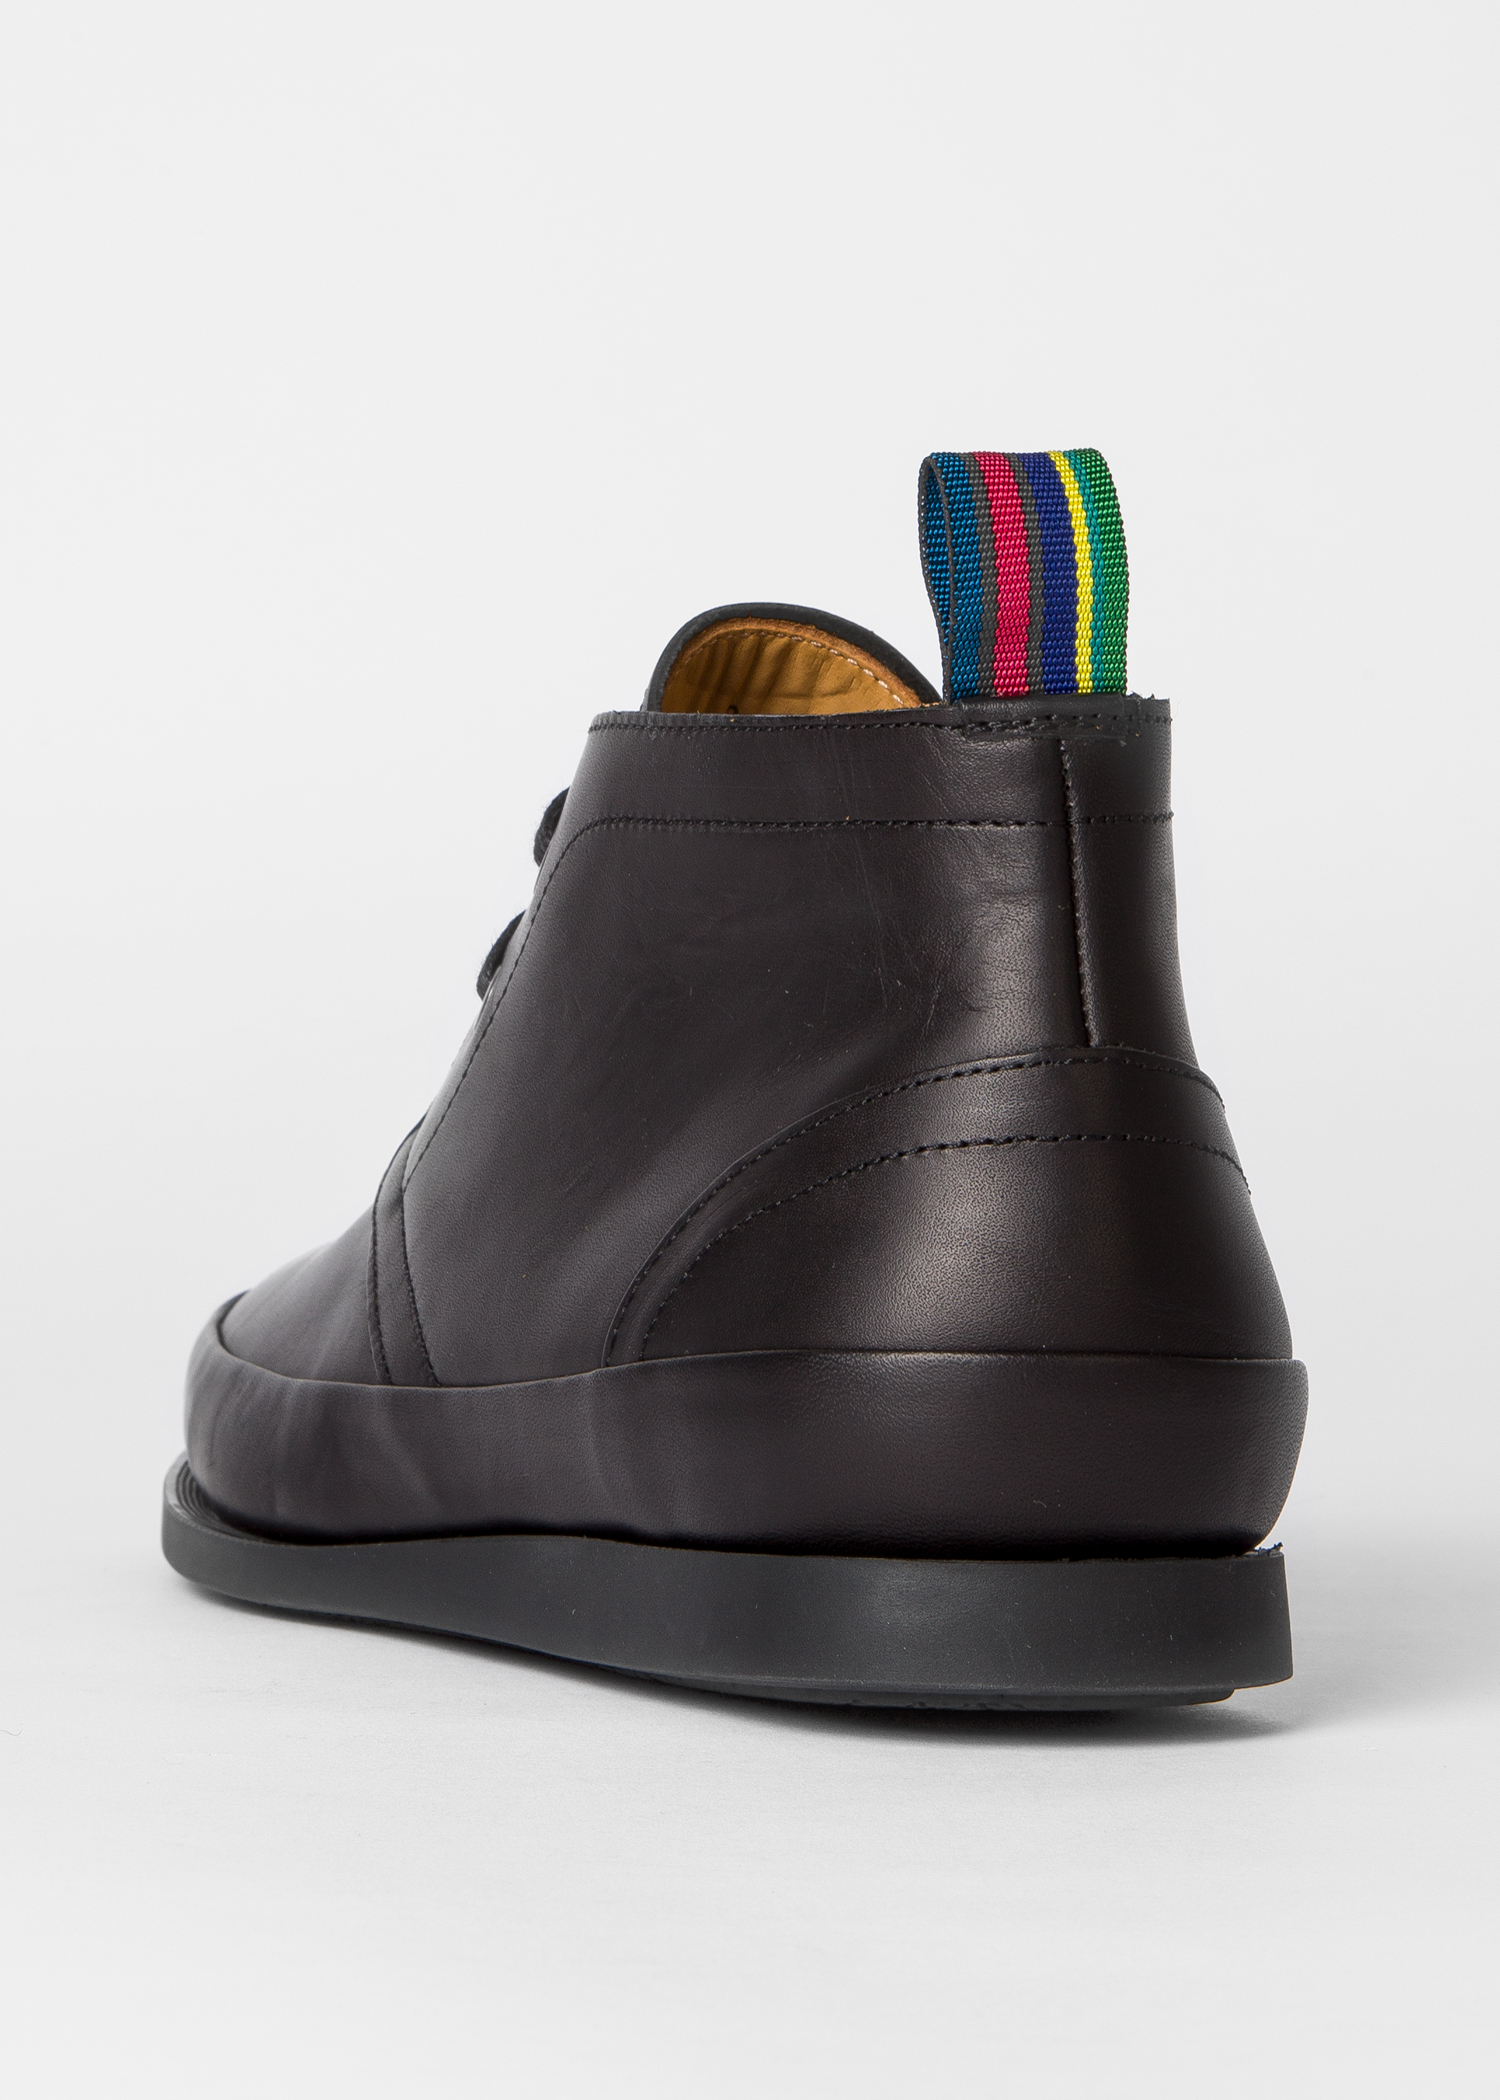 Men's Black Leather 'Cleon' Boots by Paul Smith